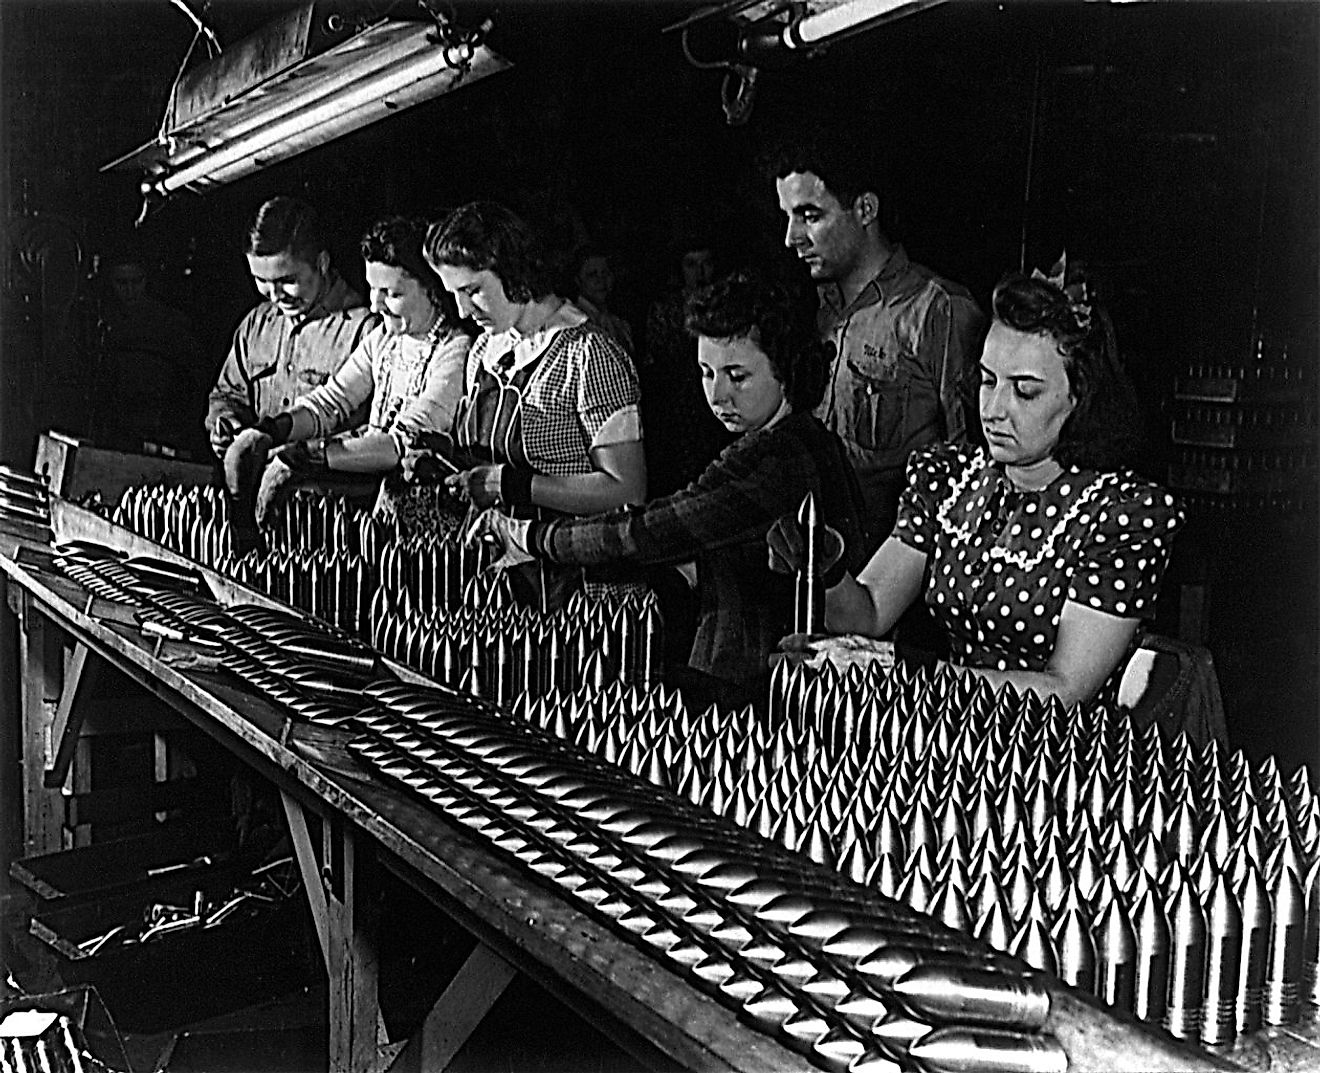 Women working in a factory during World War II. Image credit: Alfred T. Palmer/Public domain